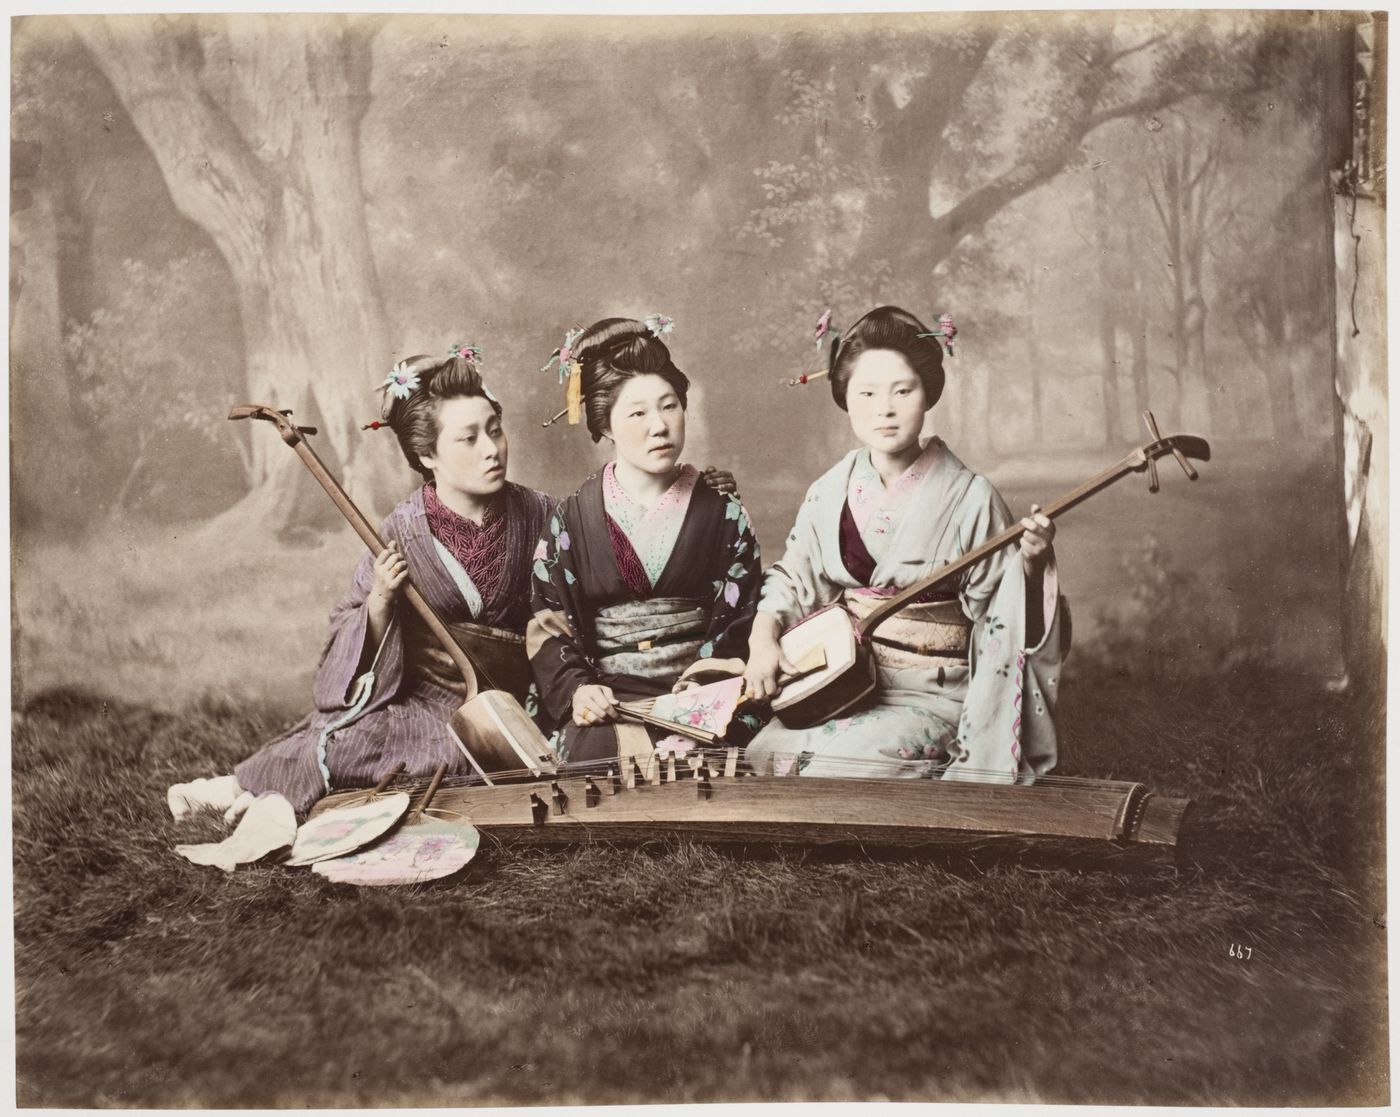 Group portrait of three women with two shamisen, a koto and fans, Japan